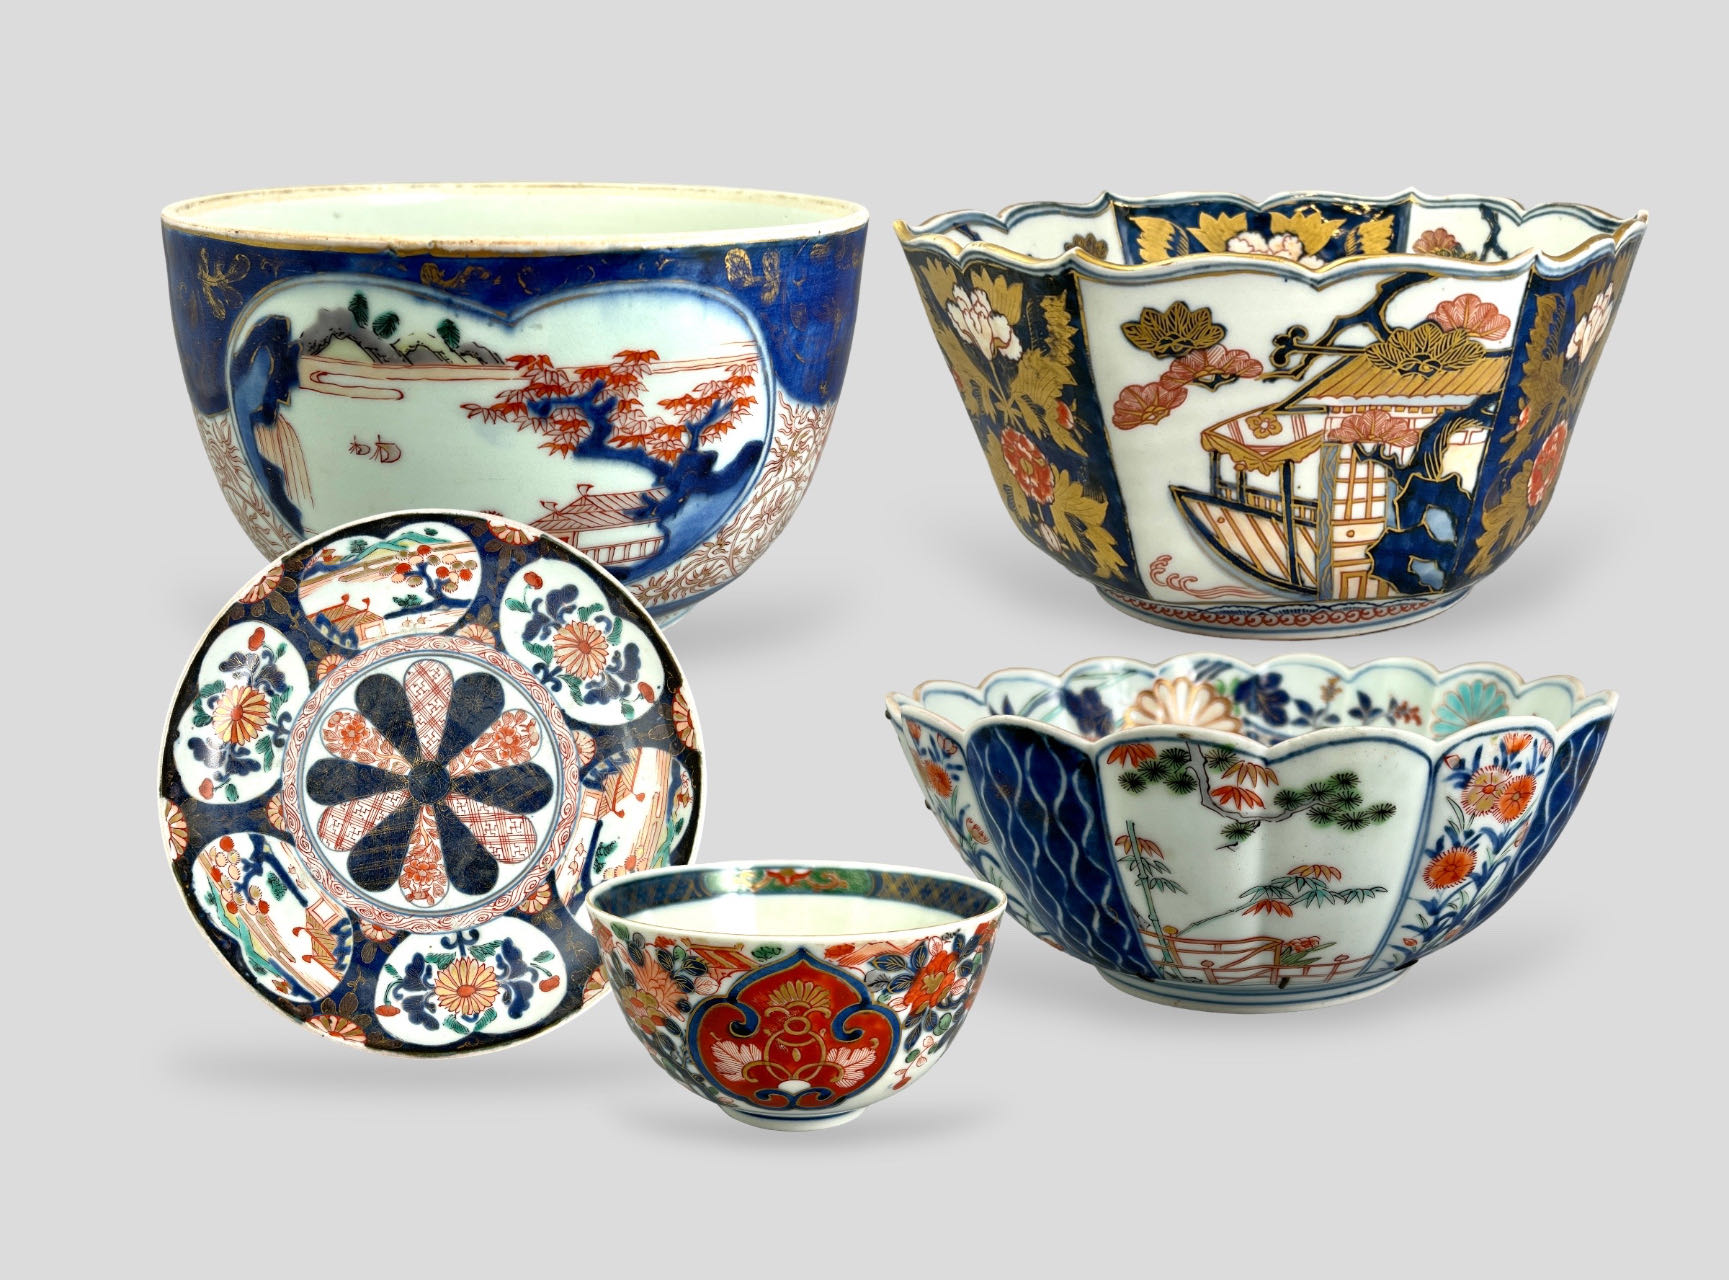 Five Japanese Imari Wares,c.1700the attractive group comprising a tureen, a deep faceted bowl, a